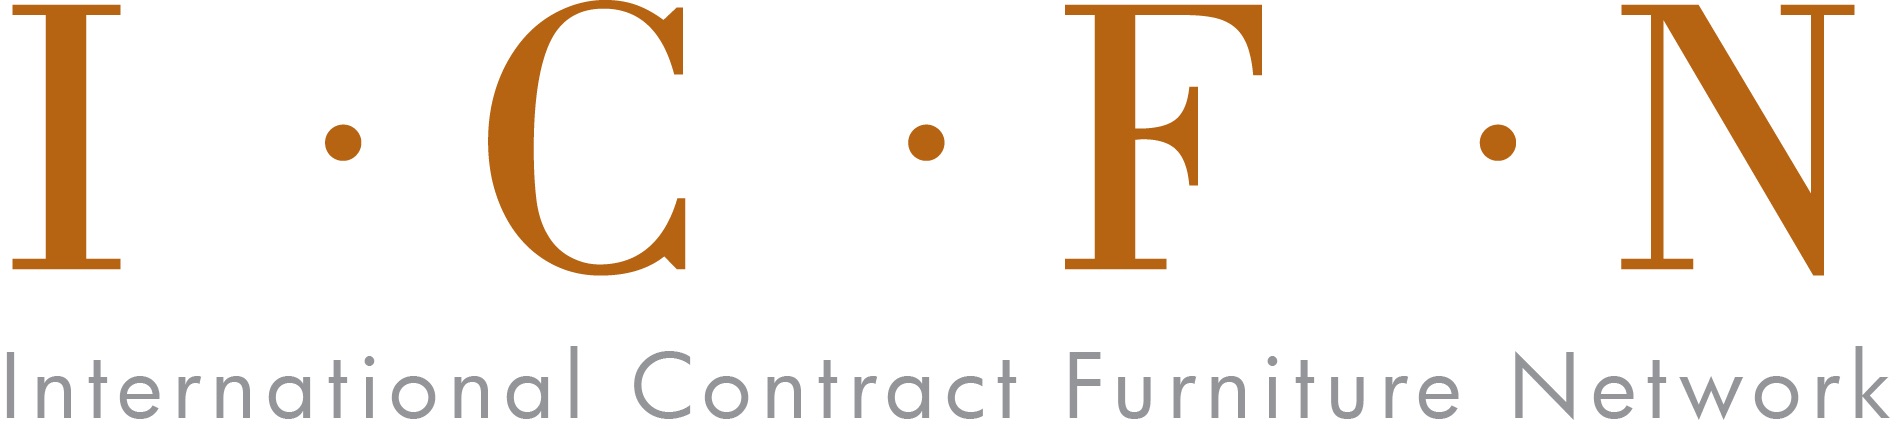 A logo of the contract furniture company